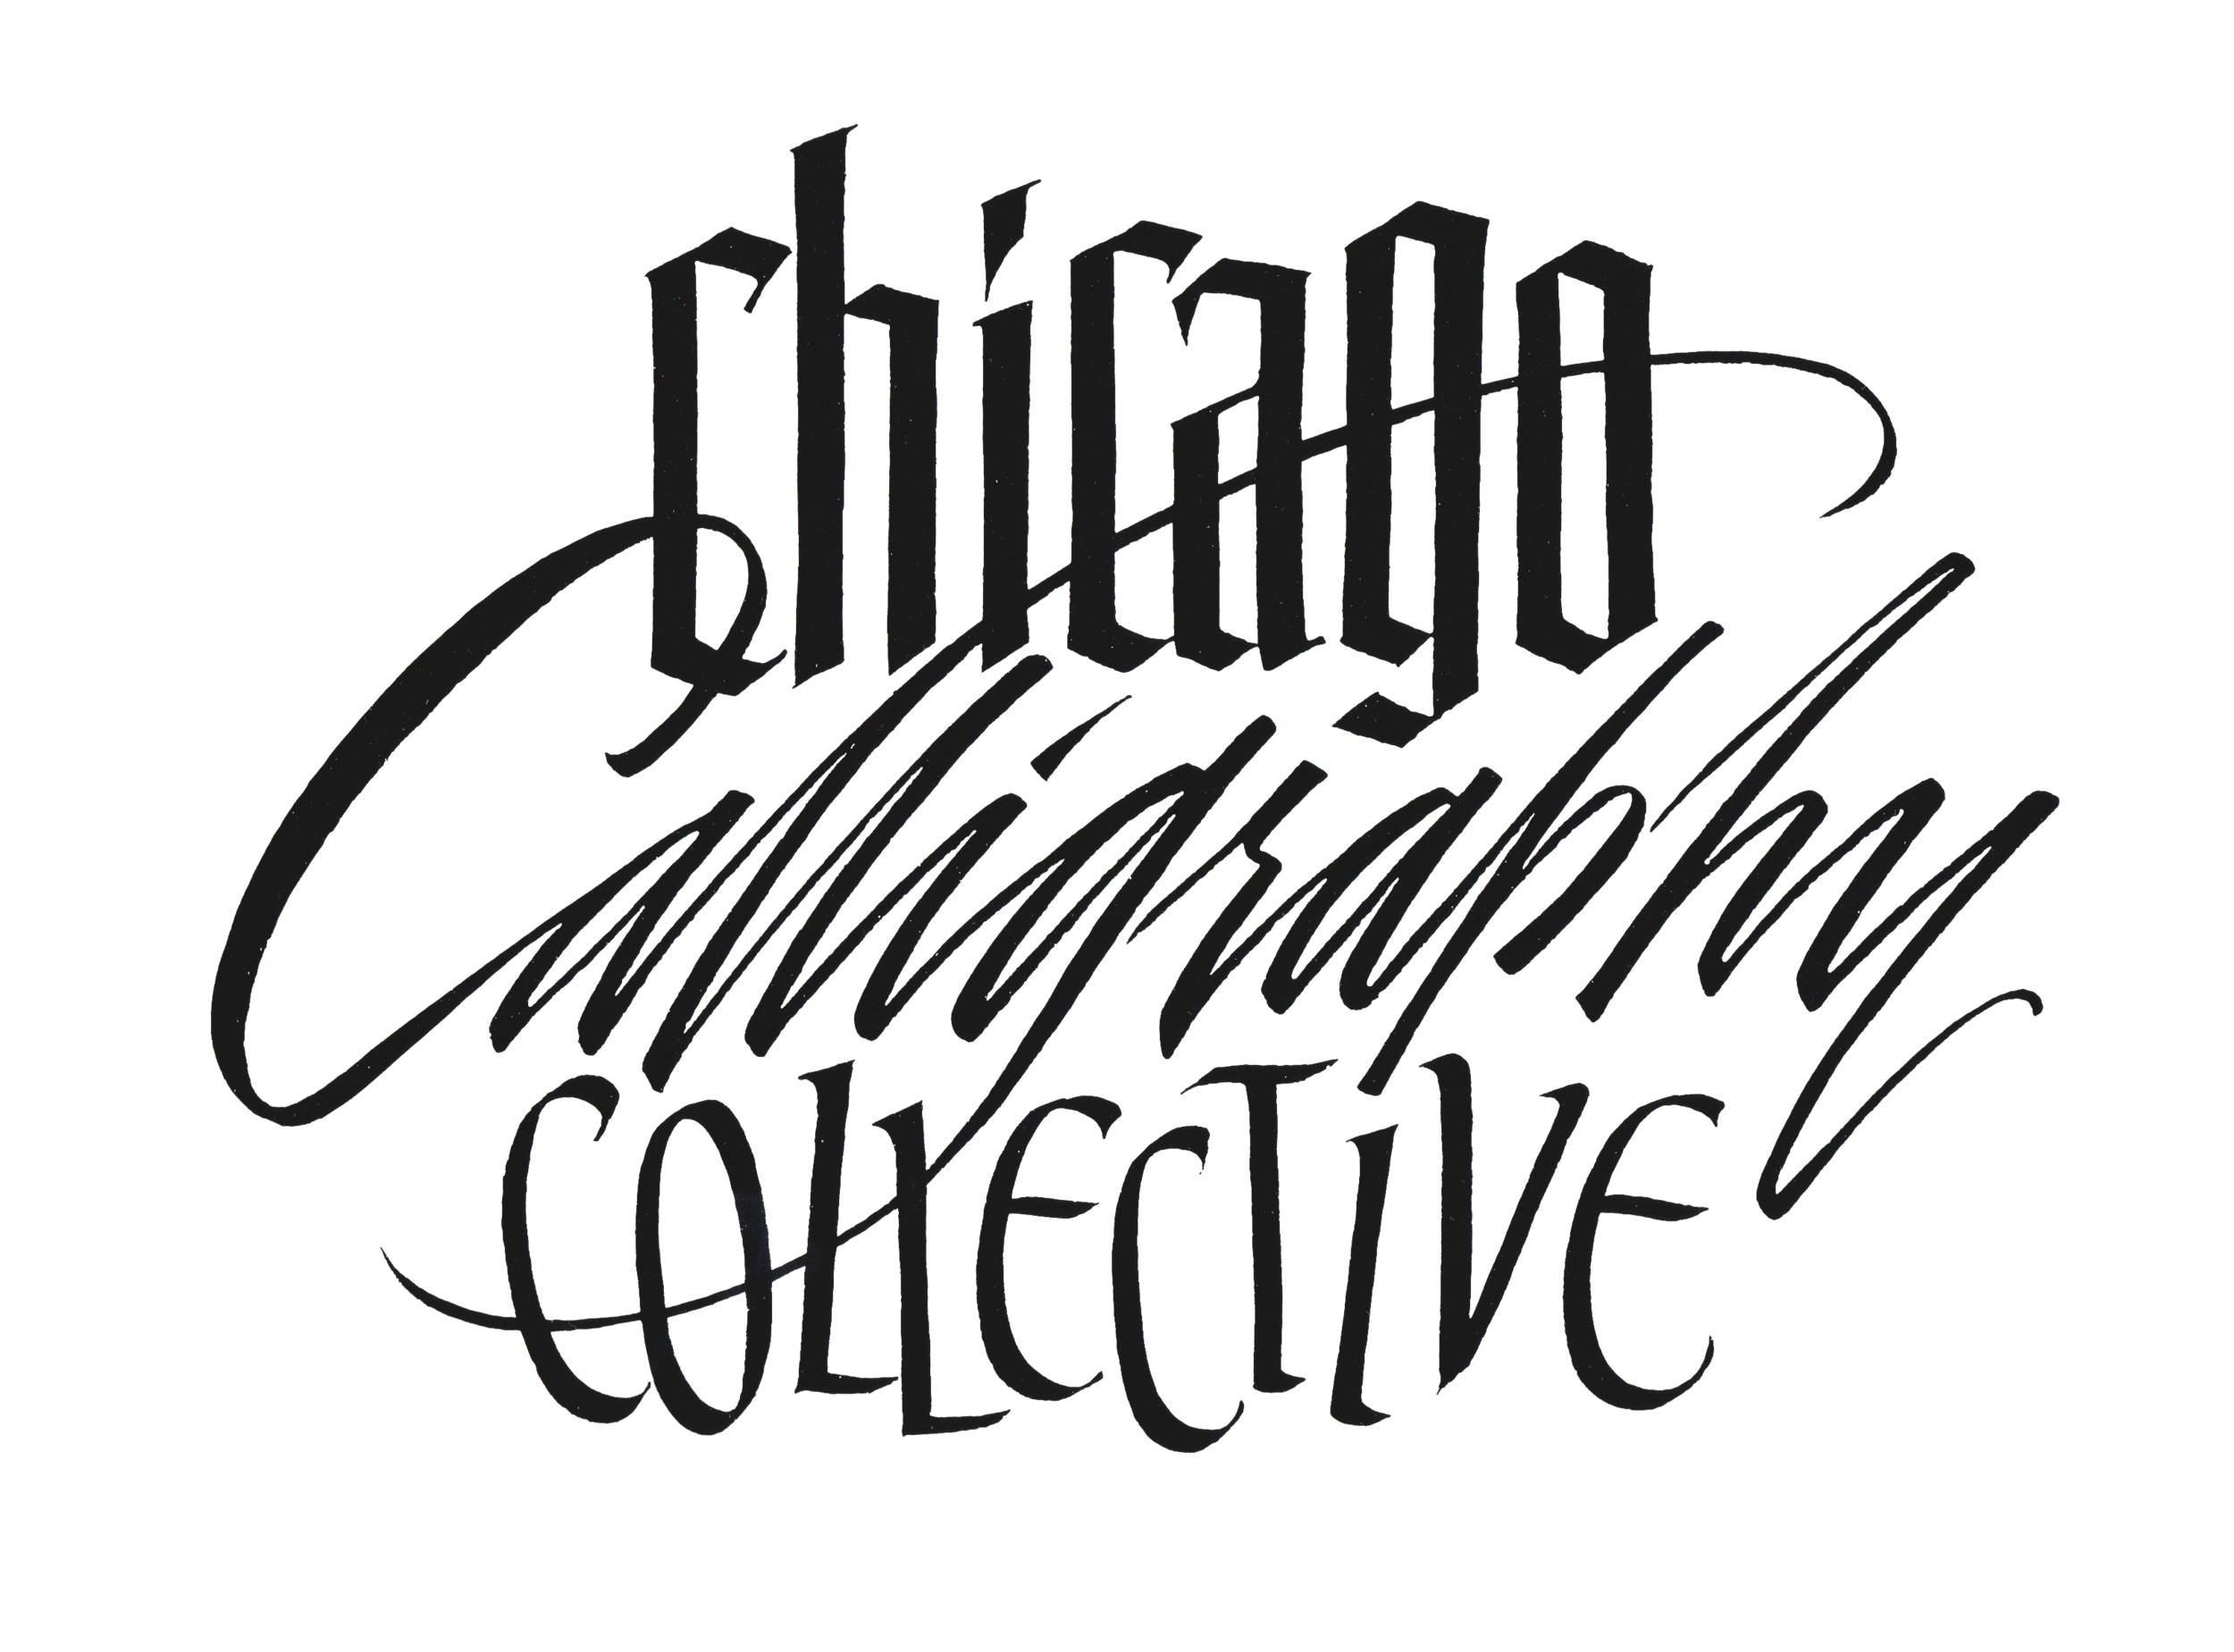 Chicago Calligraphy Collective